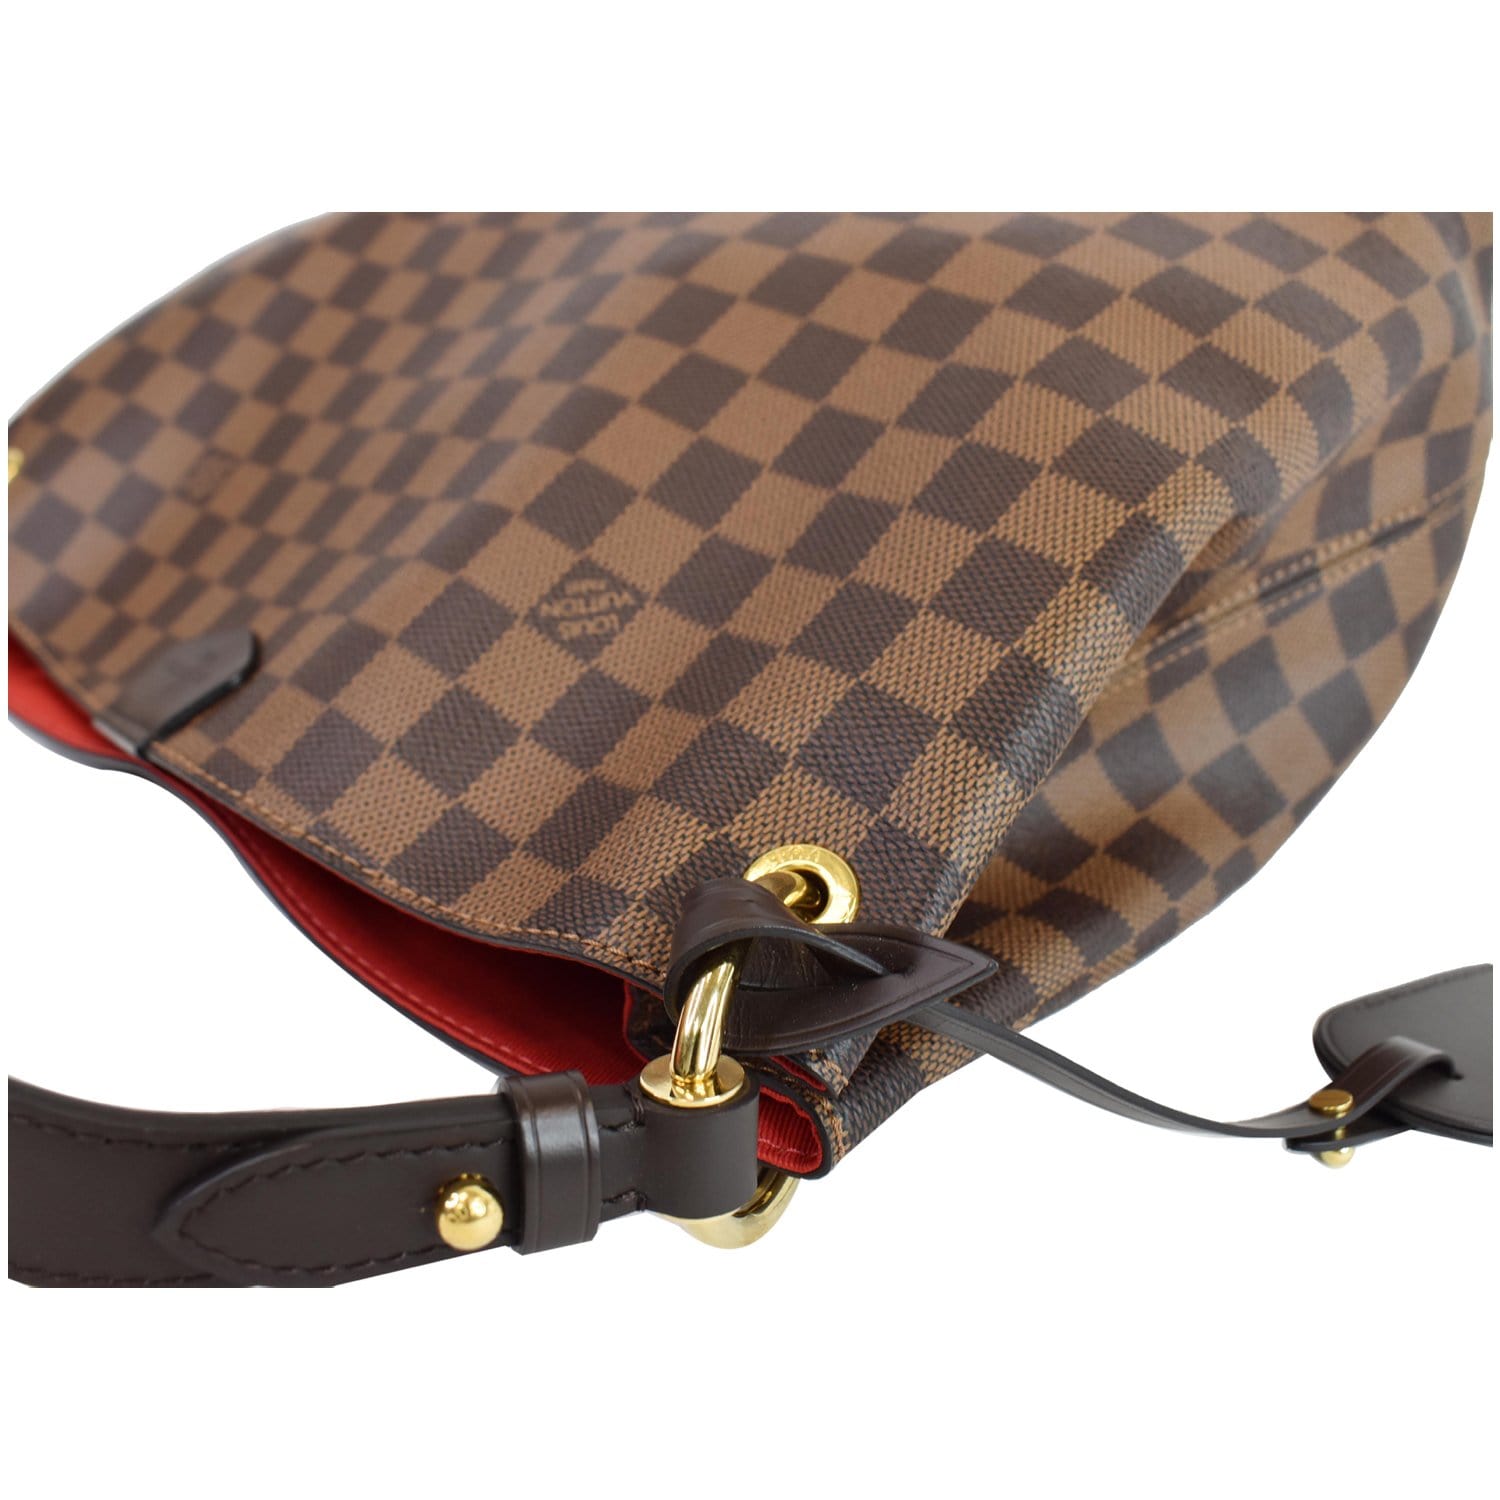 I ❤️ my LV Graceful This is the Louis Vuitton Graceful in Damier Ebene